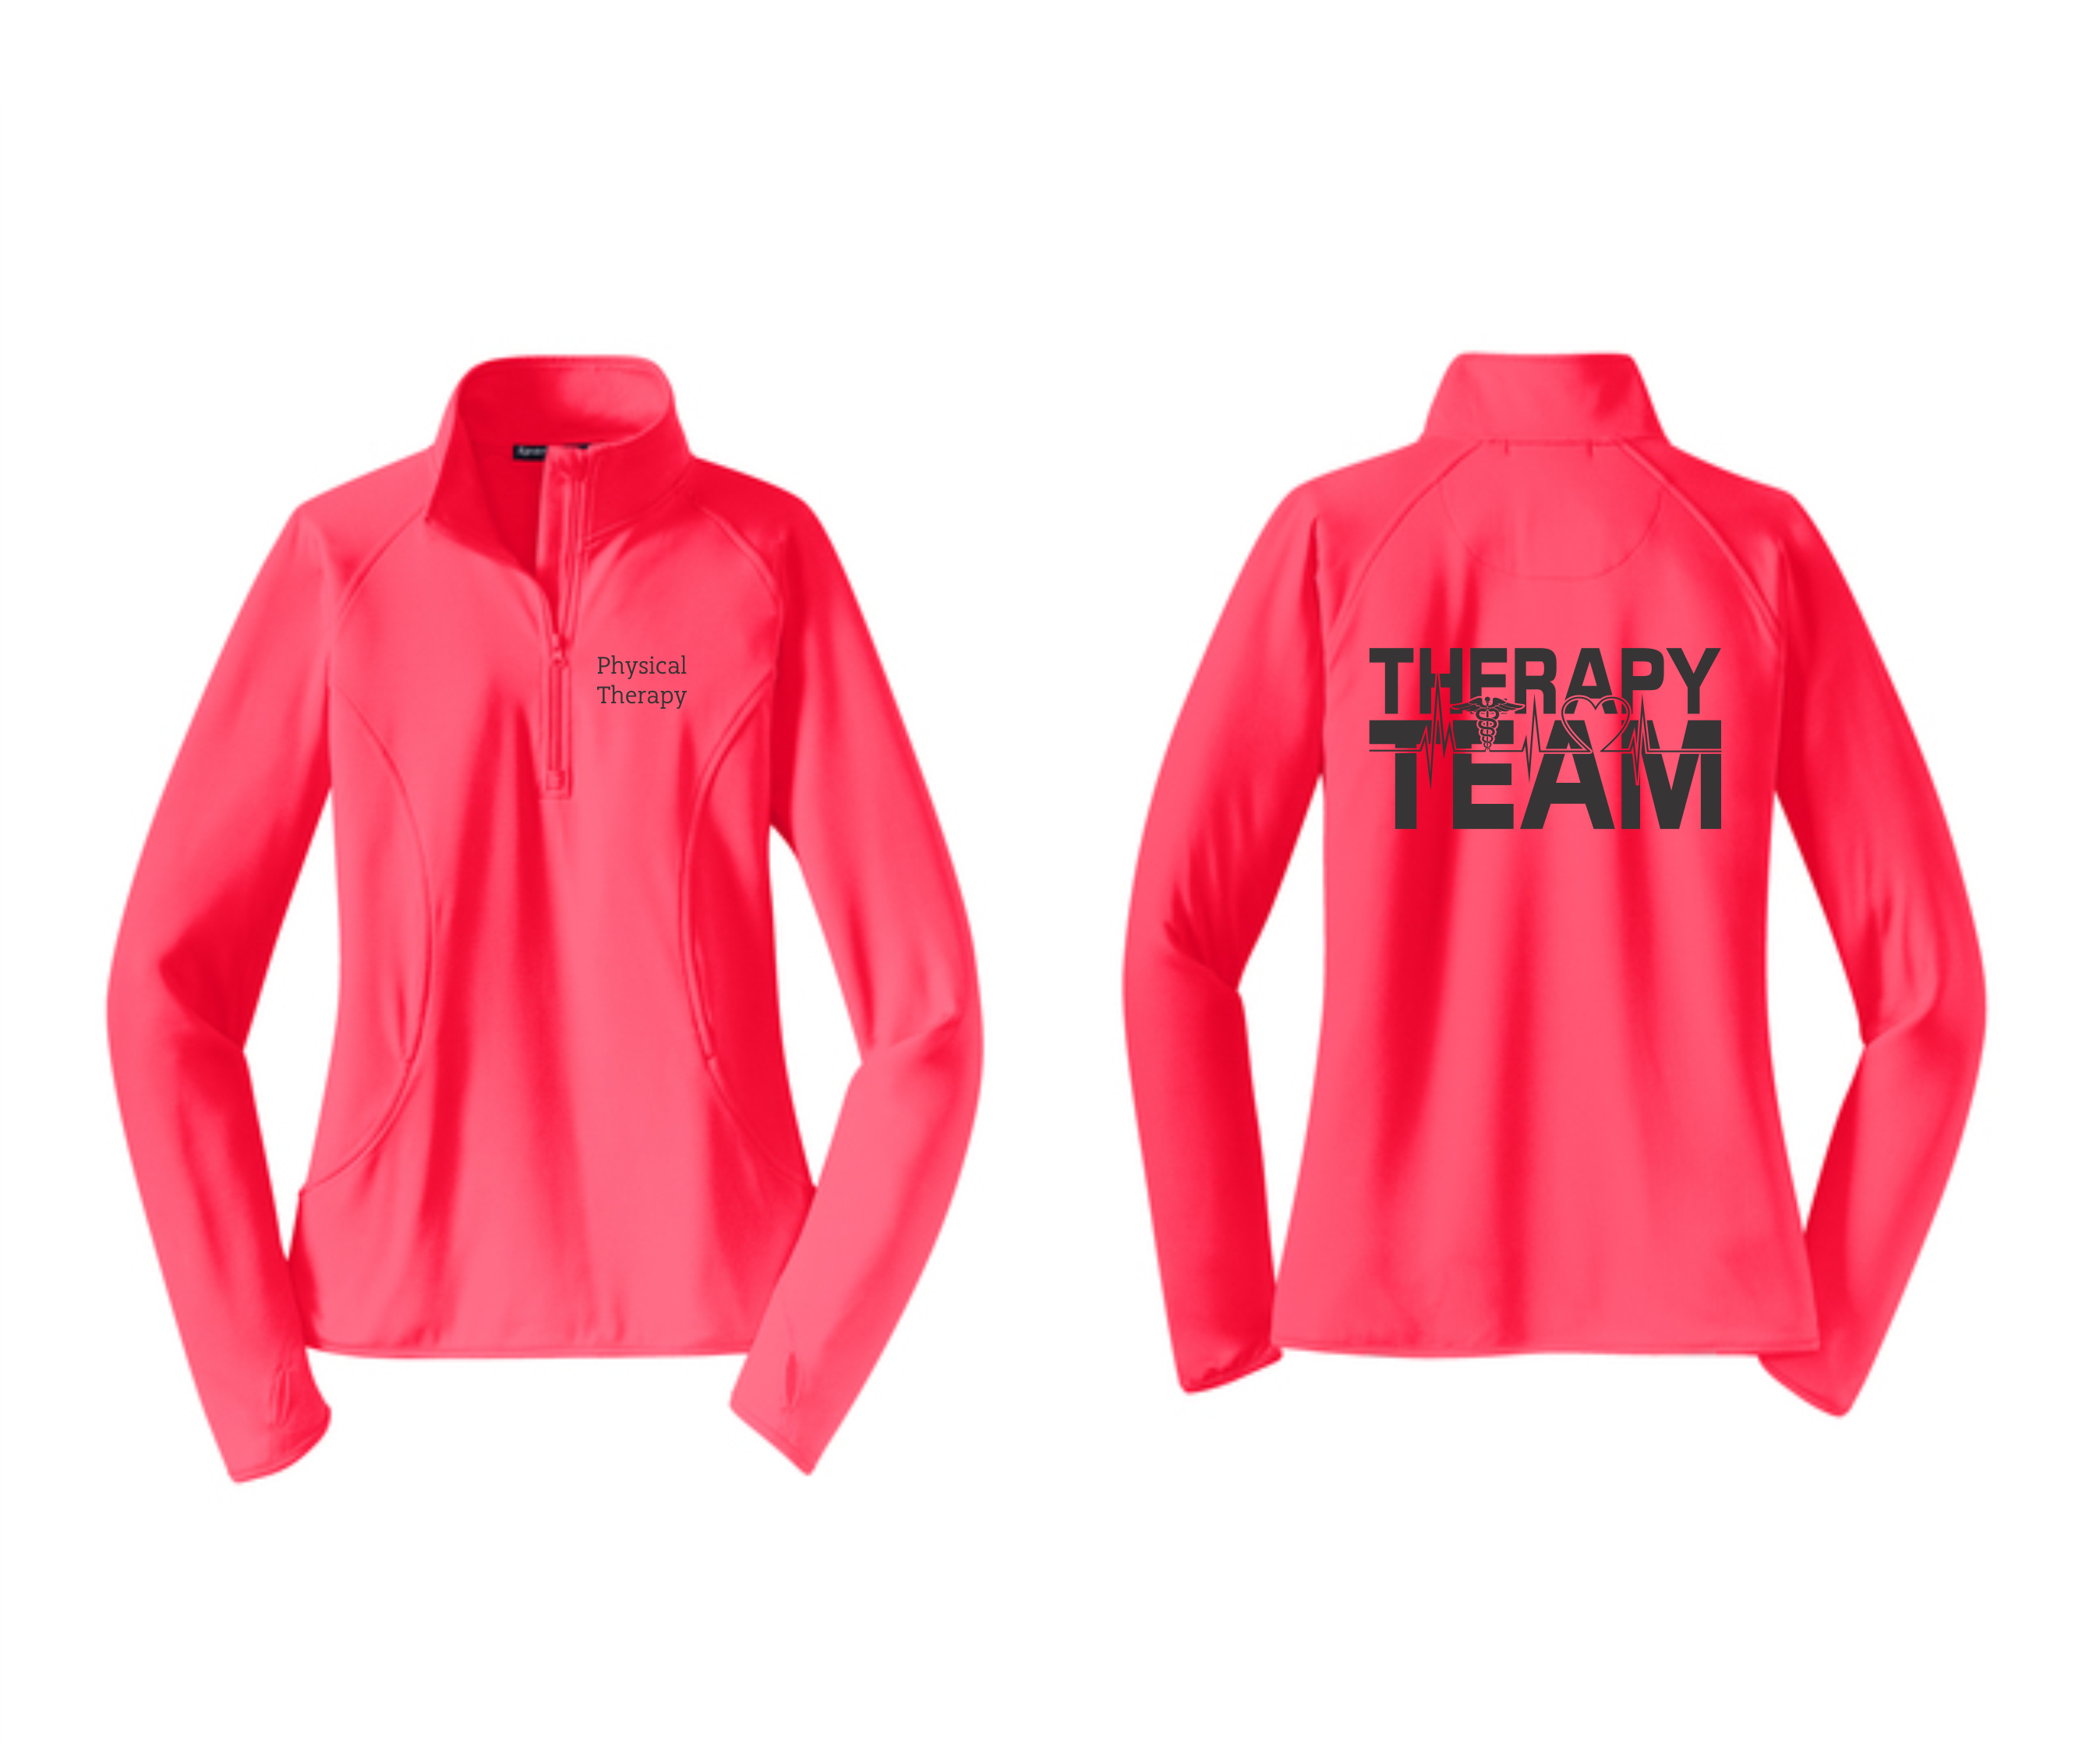 PHW - Physical Therapy Team - Ladies 1/2 or Full Zip Jacket